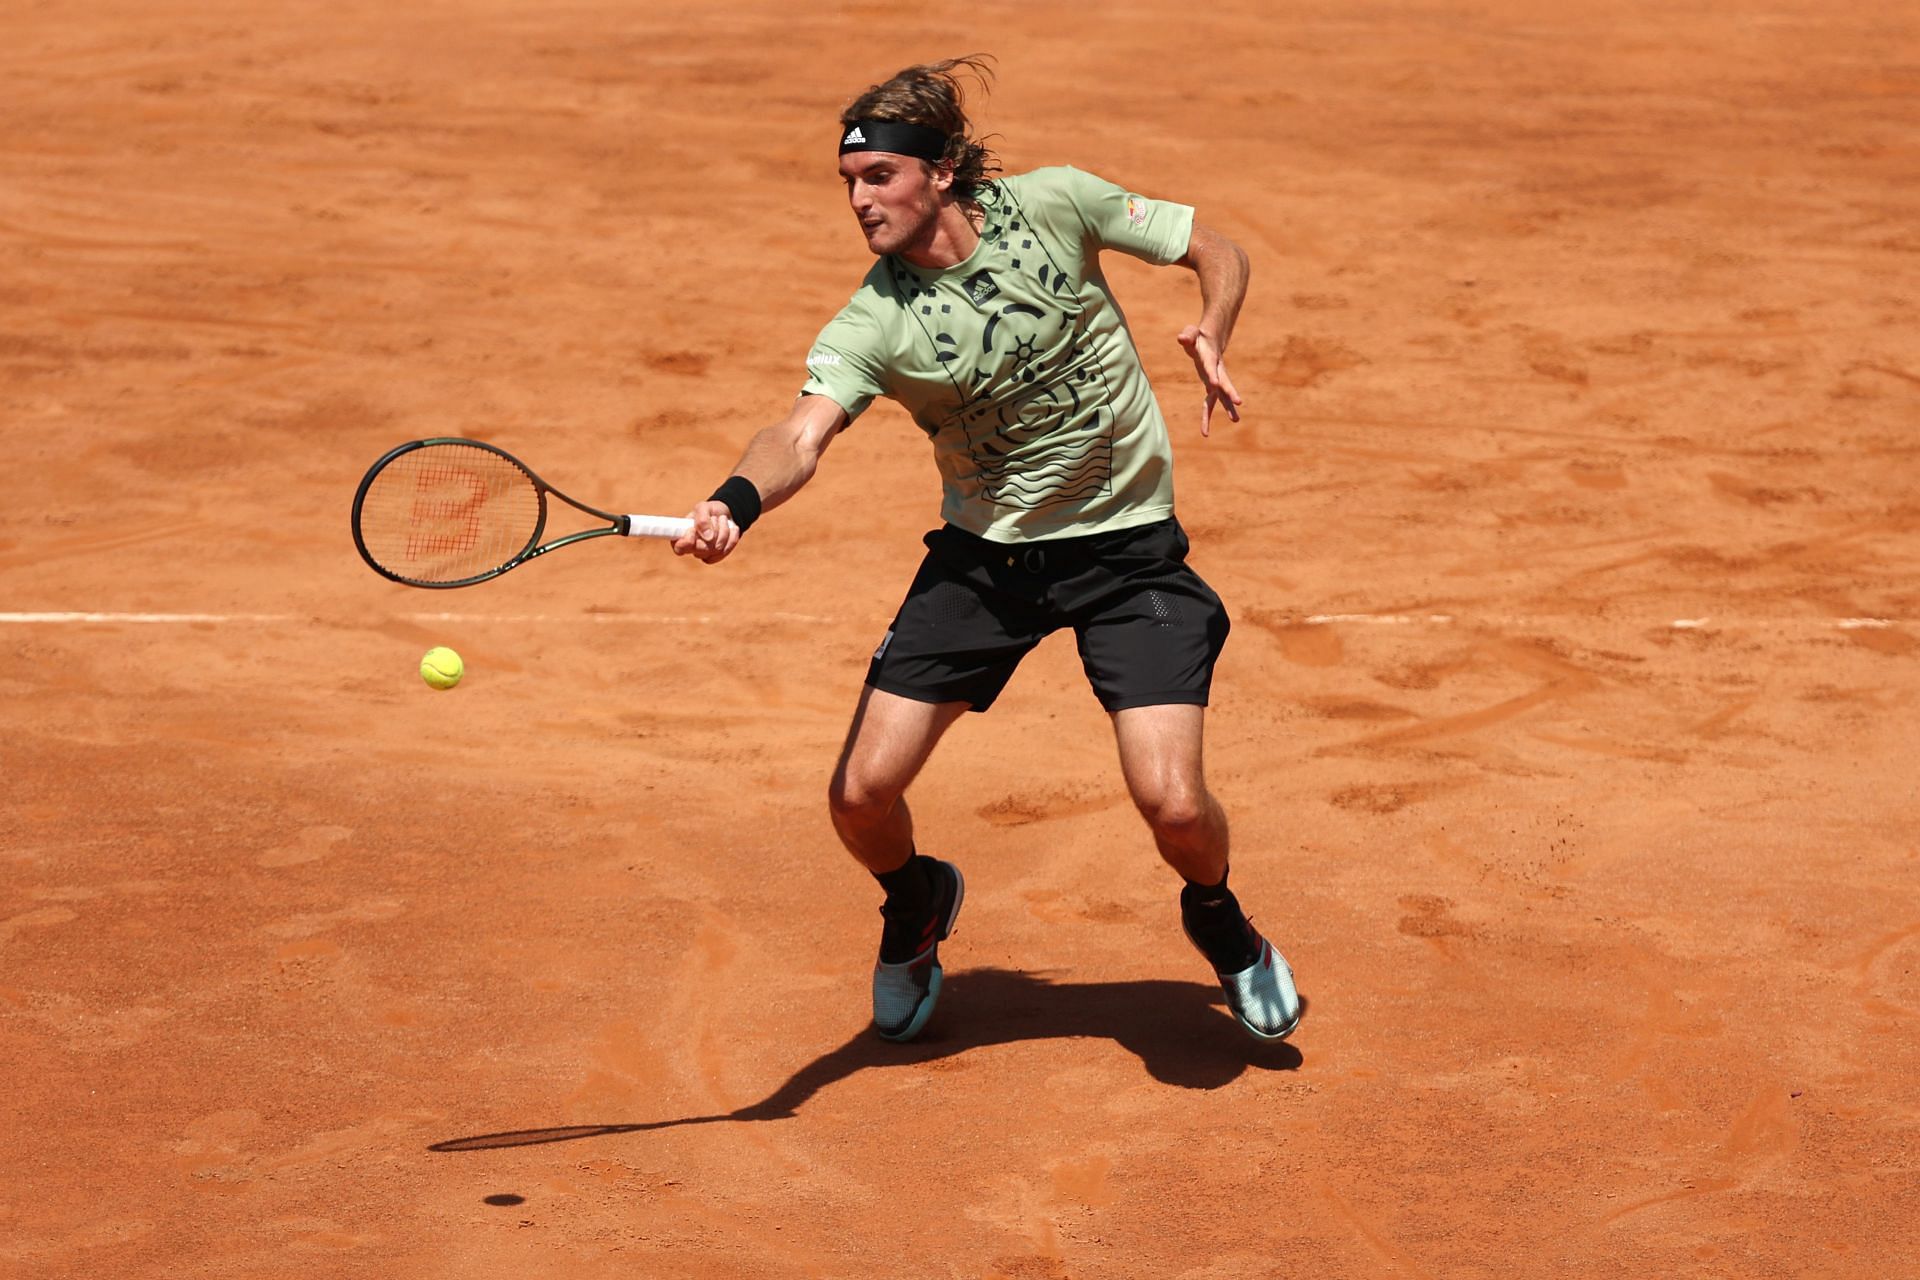 Stefanos Tsitsipas will look to get his fourth victory over Jannik Sinner